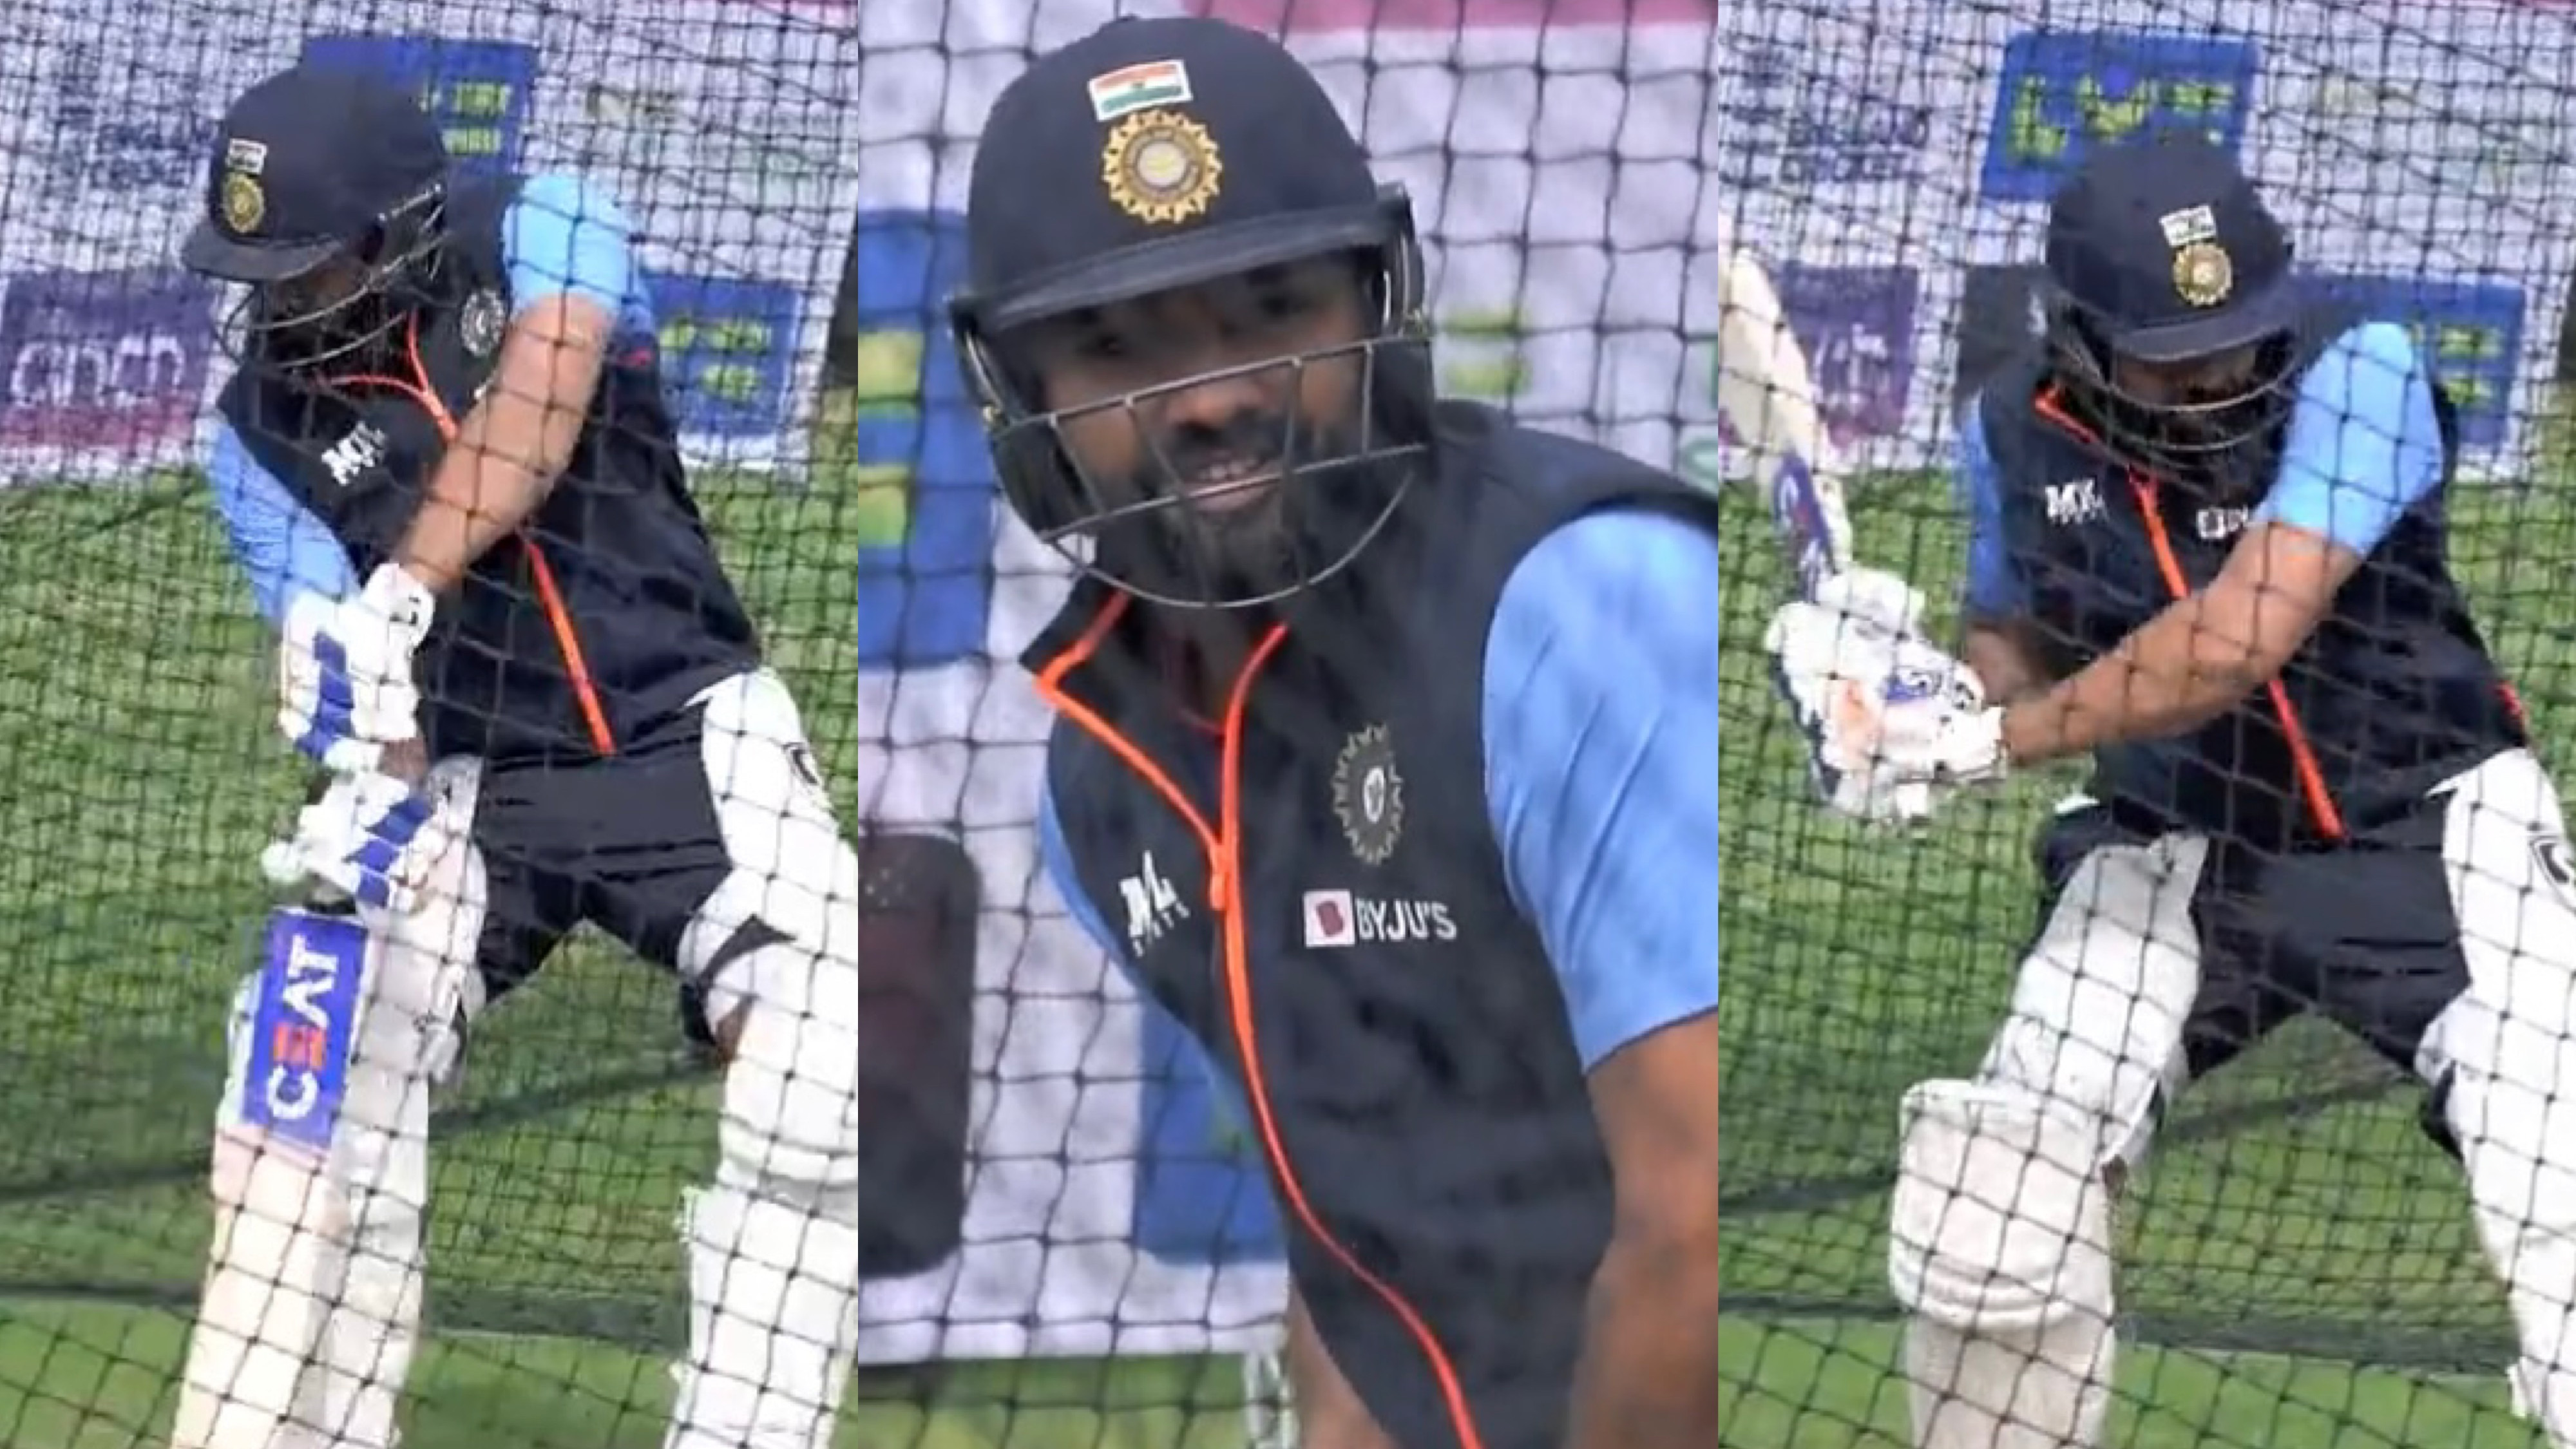 ENG v IND 2022: WATCH - Rohit Sharma prepares himself for white-ball series after recovering from Covid-19